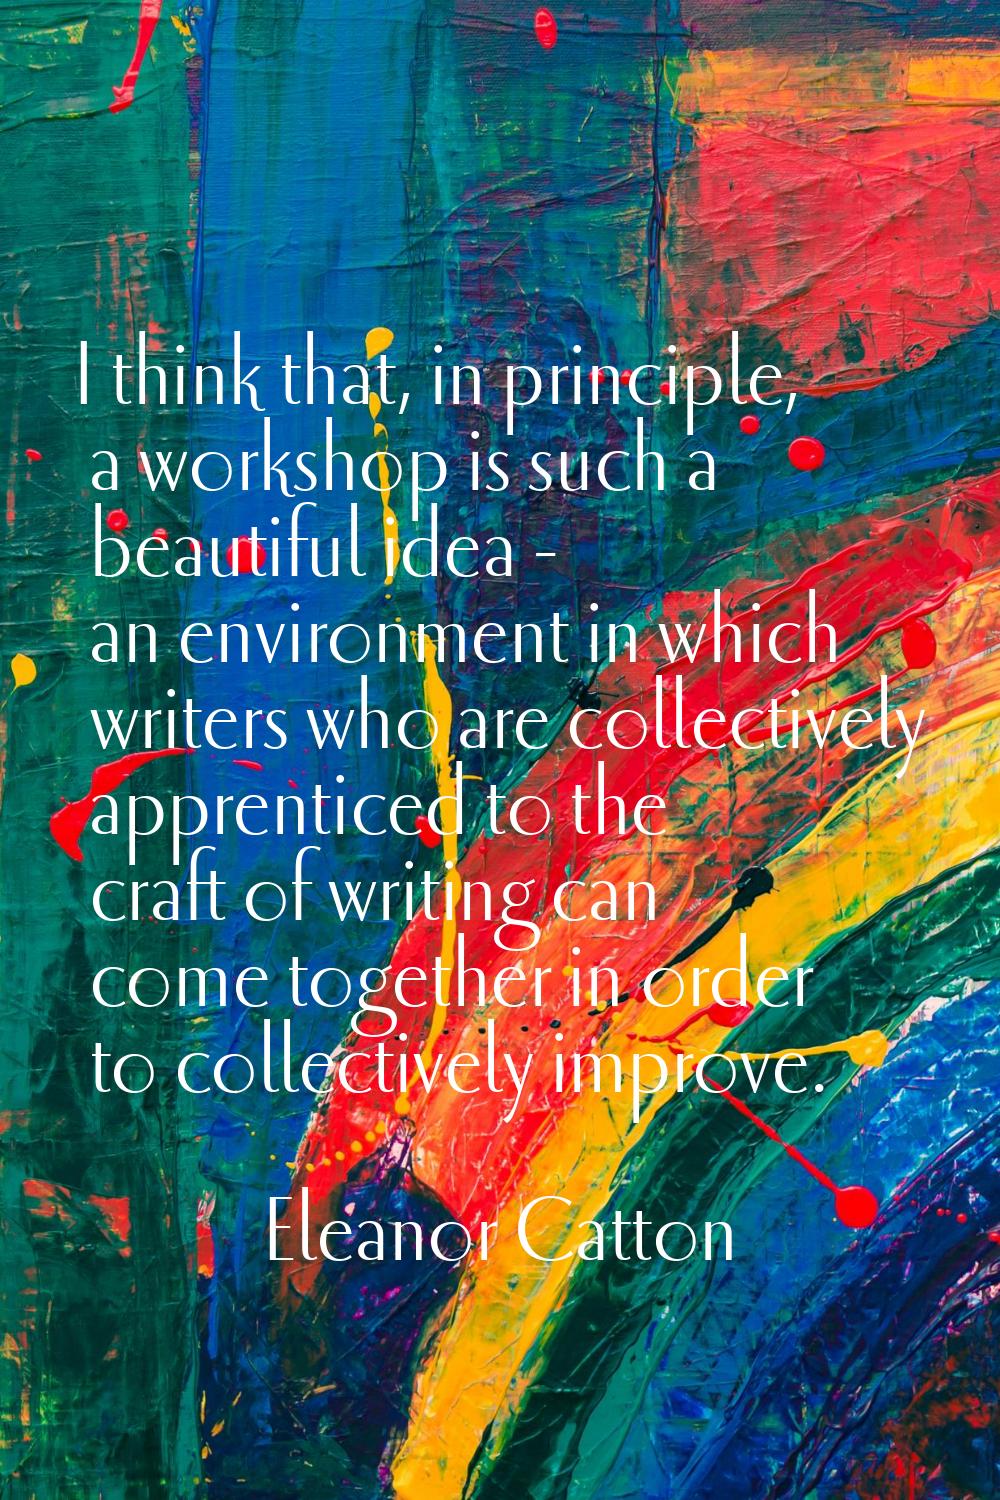 I think that, in principle, a workshop is such a beautiful idea - an environment in which writers w